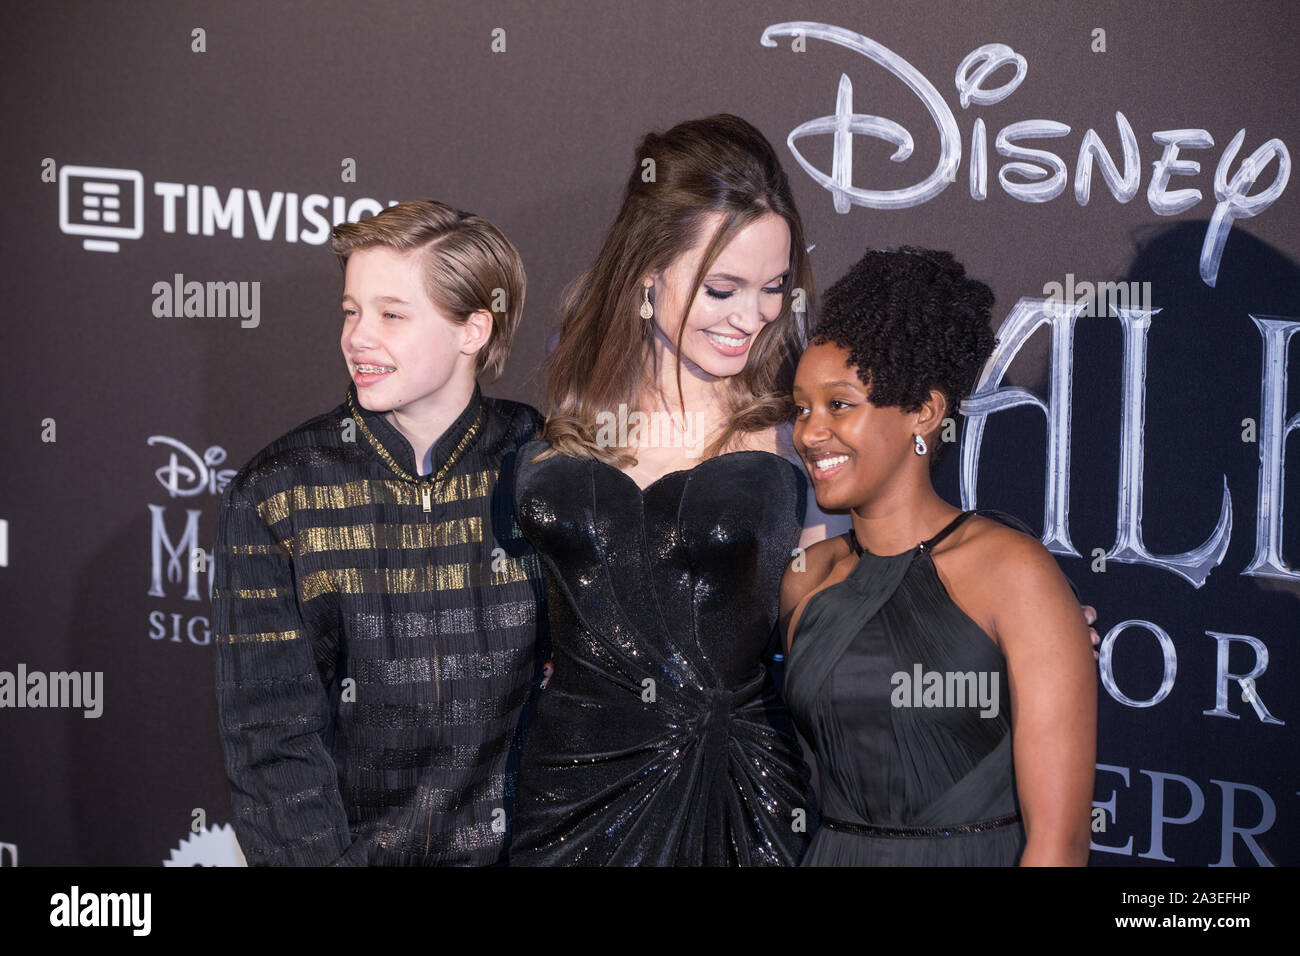 Roma, Italy. 07th Oct, 2019. Angelina Jolie with her daughters Shiloh Nouvel and Zahara Red Carpet of the film 'Maleficent - Lady of Evil', distributed by The Walt Disney Company (Photo by Matteo Nardone/Pacific Press) Credit: Pacific Press Agency/Alamy Live News Stock Photo